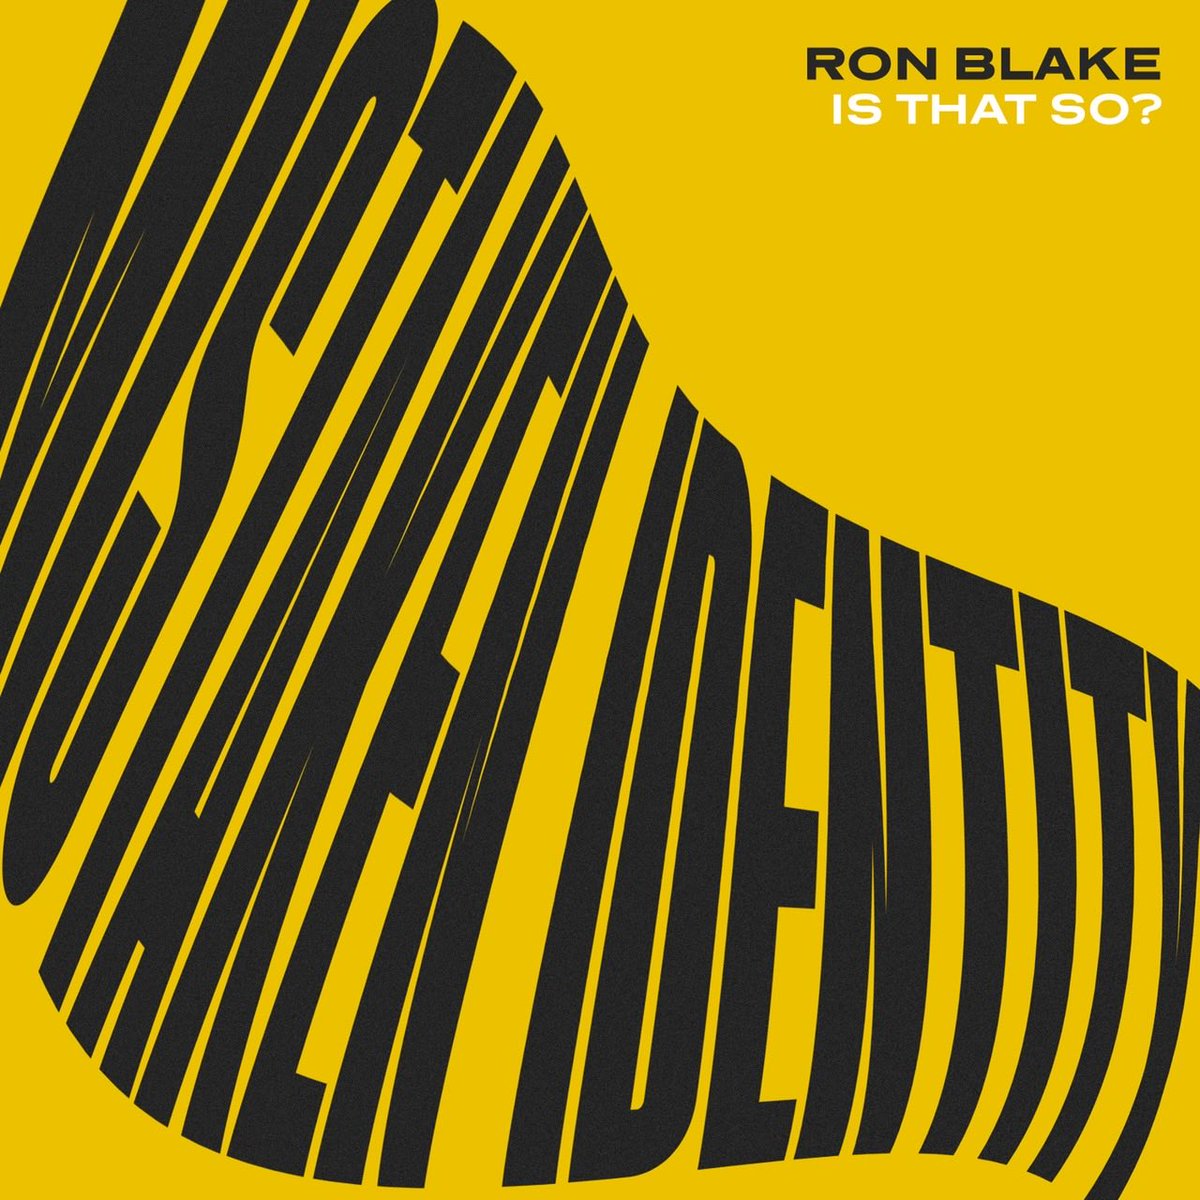 RON BLAKE is one of our GREAT musicians. He is a band leader, a gifted sax-man and flutist, and one of the featured musicians on “Saturday Night Live.” New album, MISTAKEN IDENTITY, coming soon, but his first single from it—“Is that so?”—available NOW on all streaming platforms. https://t.co/zKThuzS5Ww